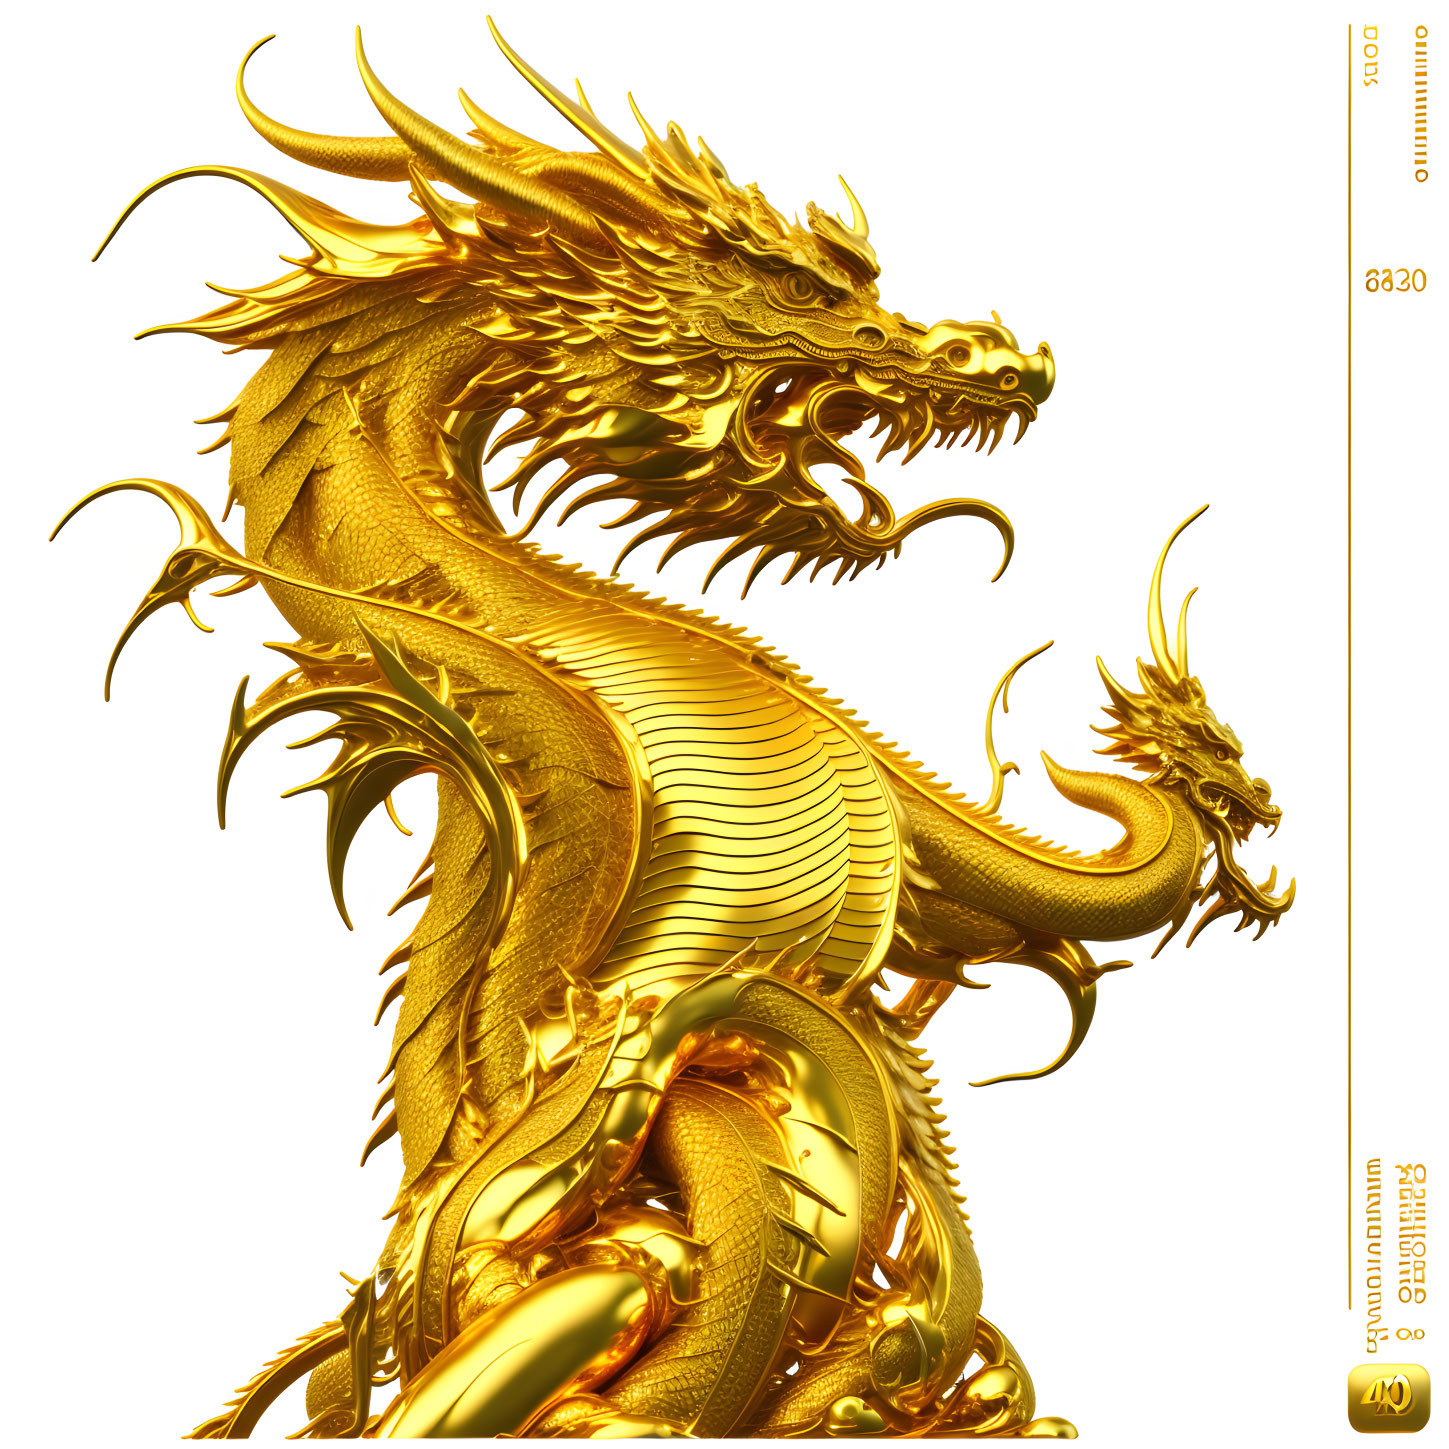 Intricate Golden Dragon Statue with Roaring Faces